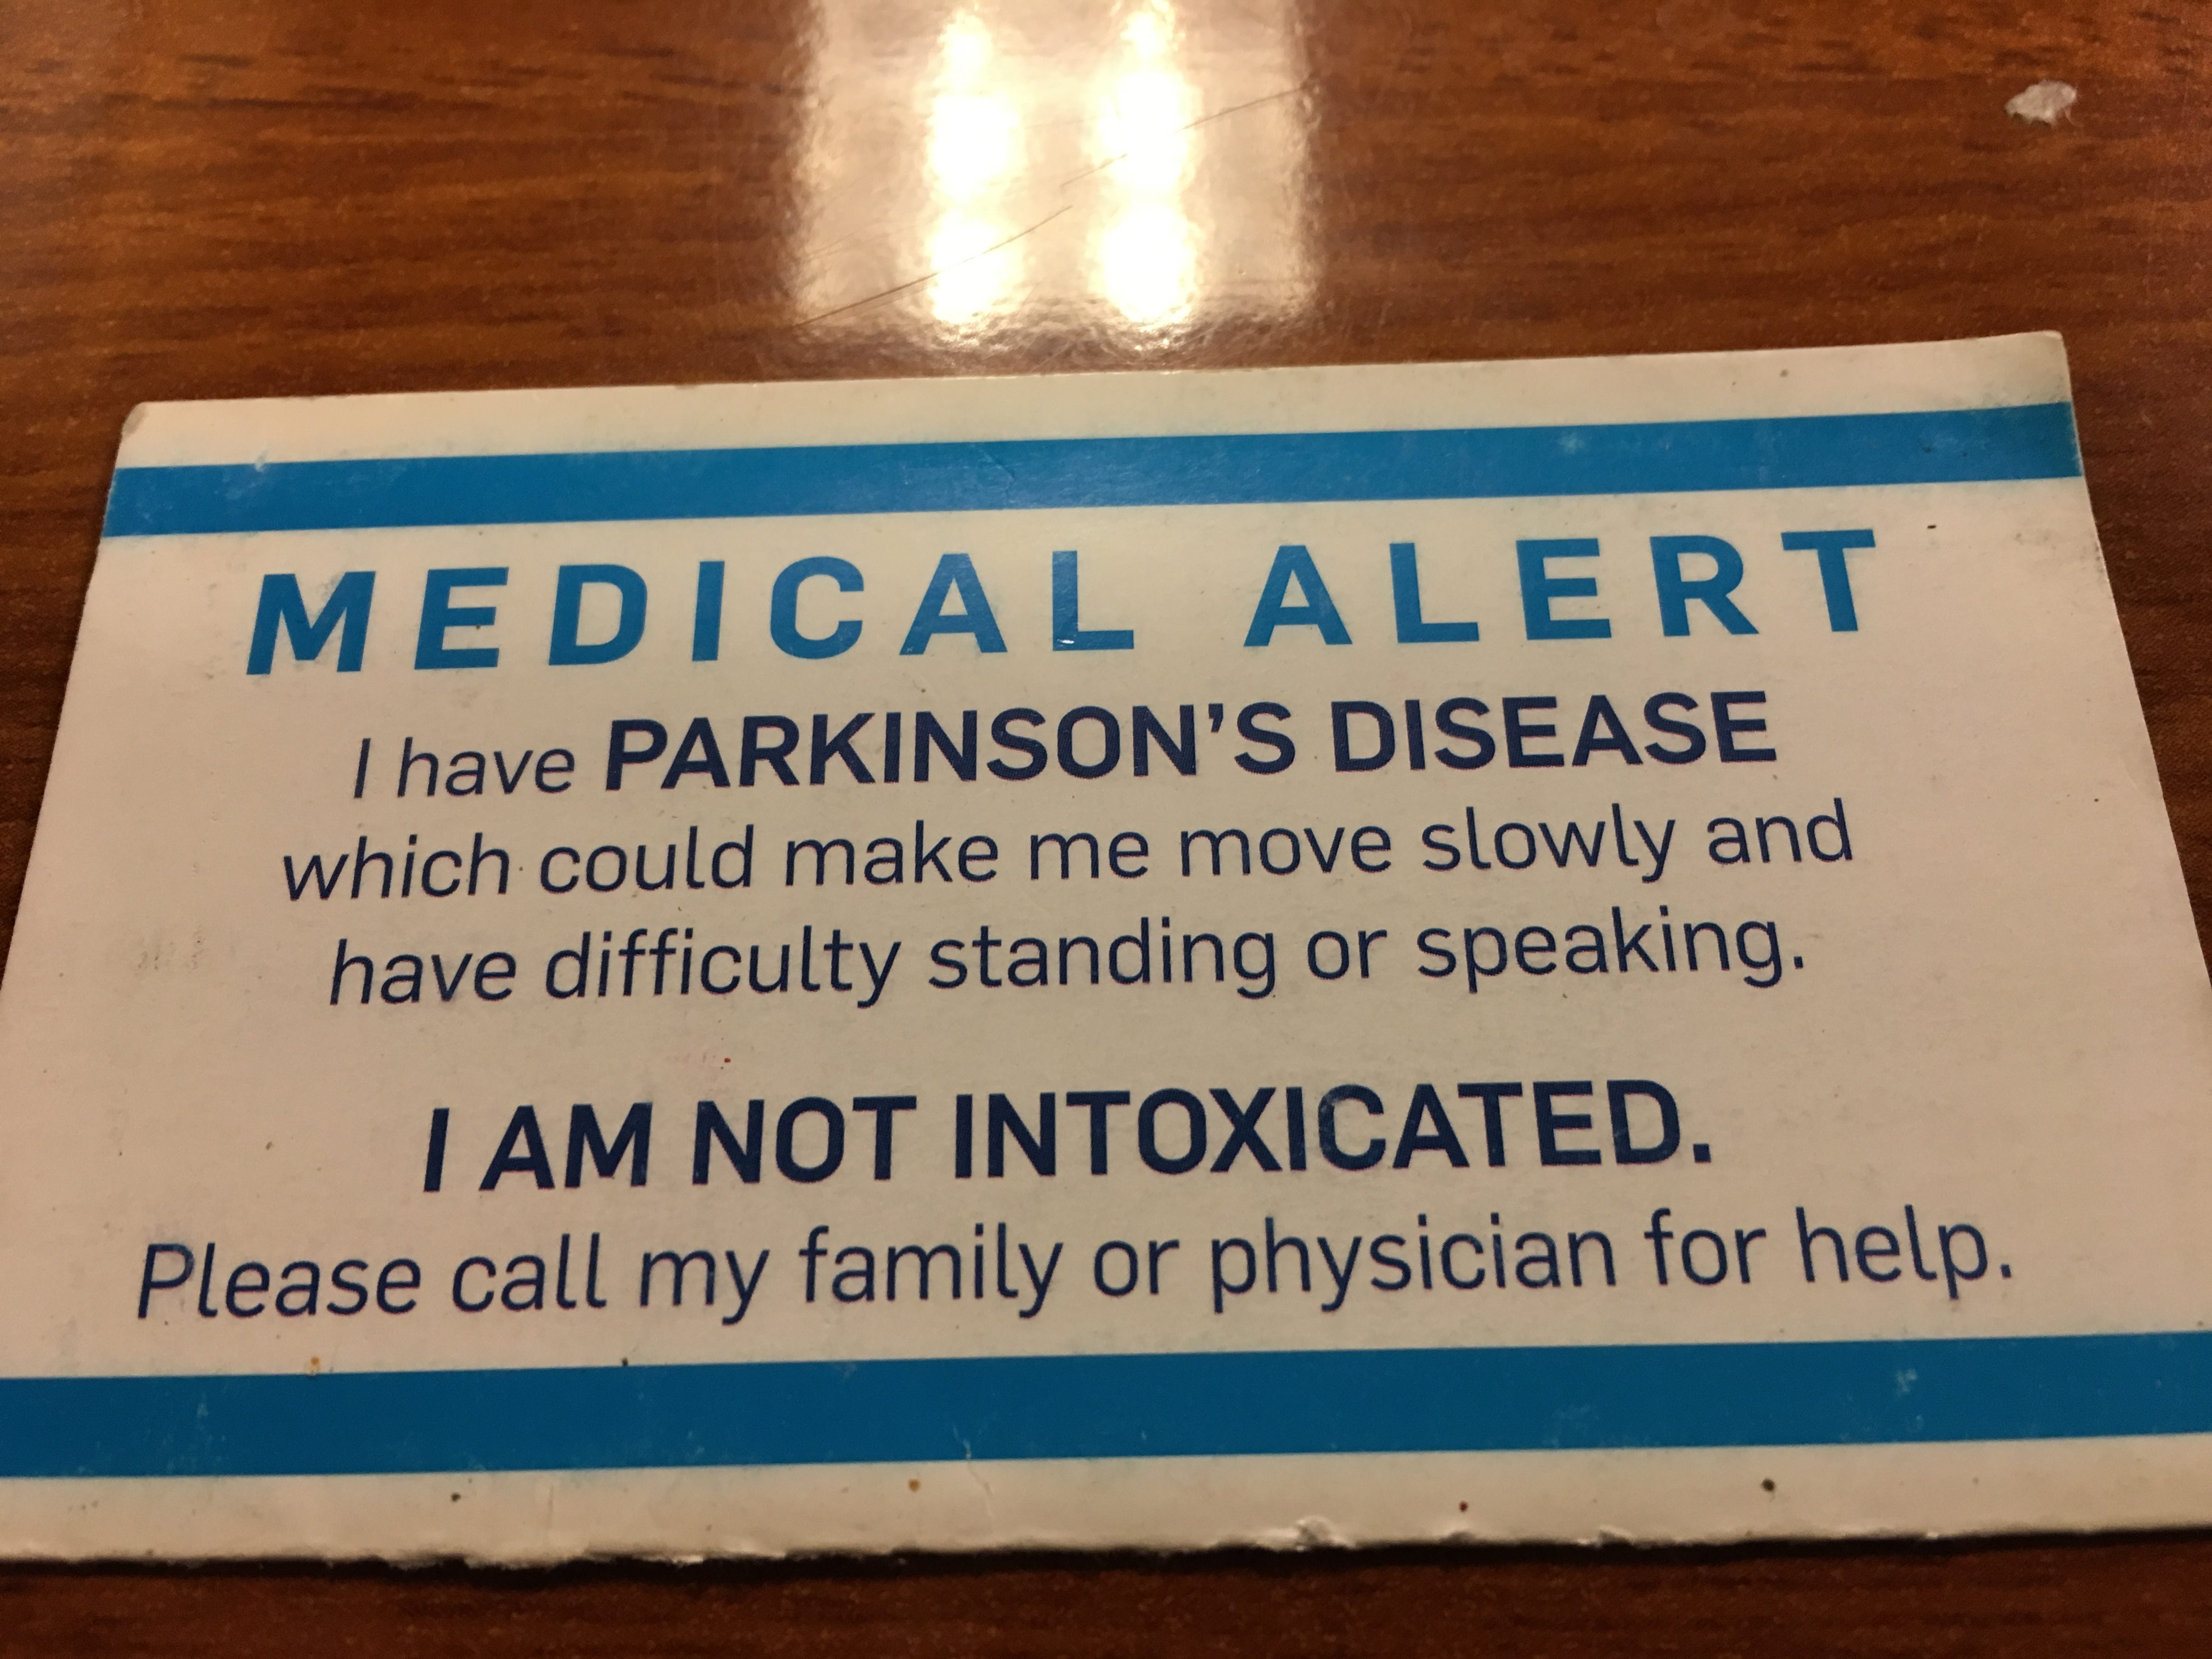 I’m not intoxicated, I have Parkinson’s